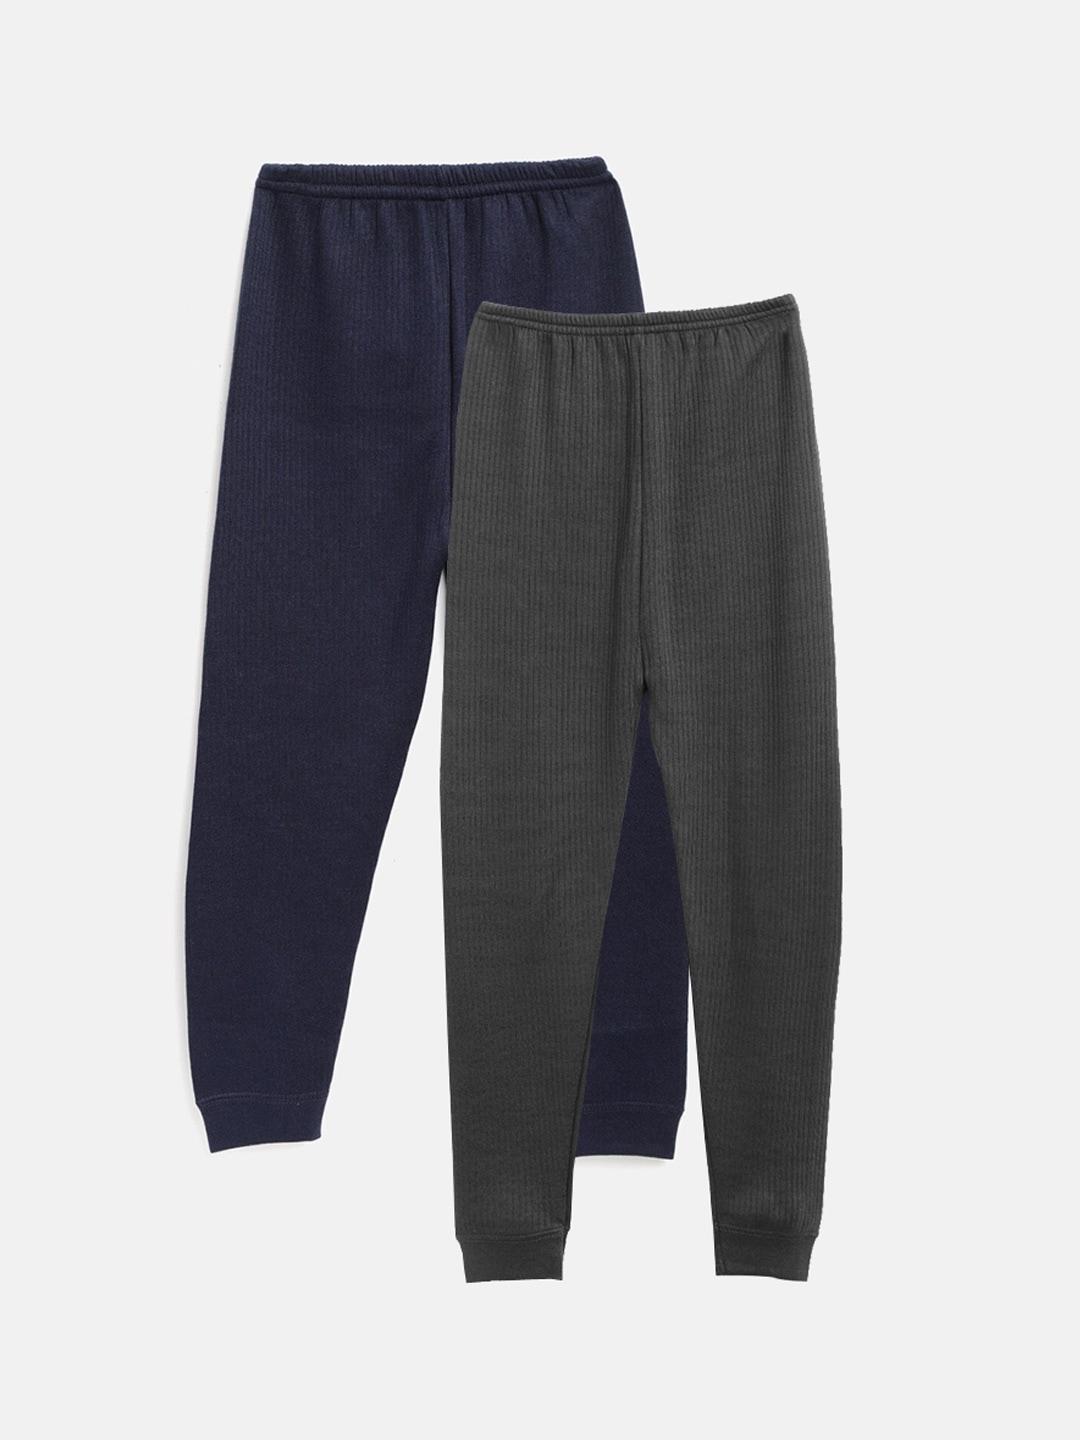 kanvin boys charcoal & navy blue self striped thermal bottoms